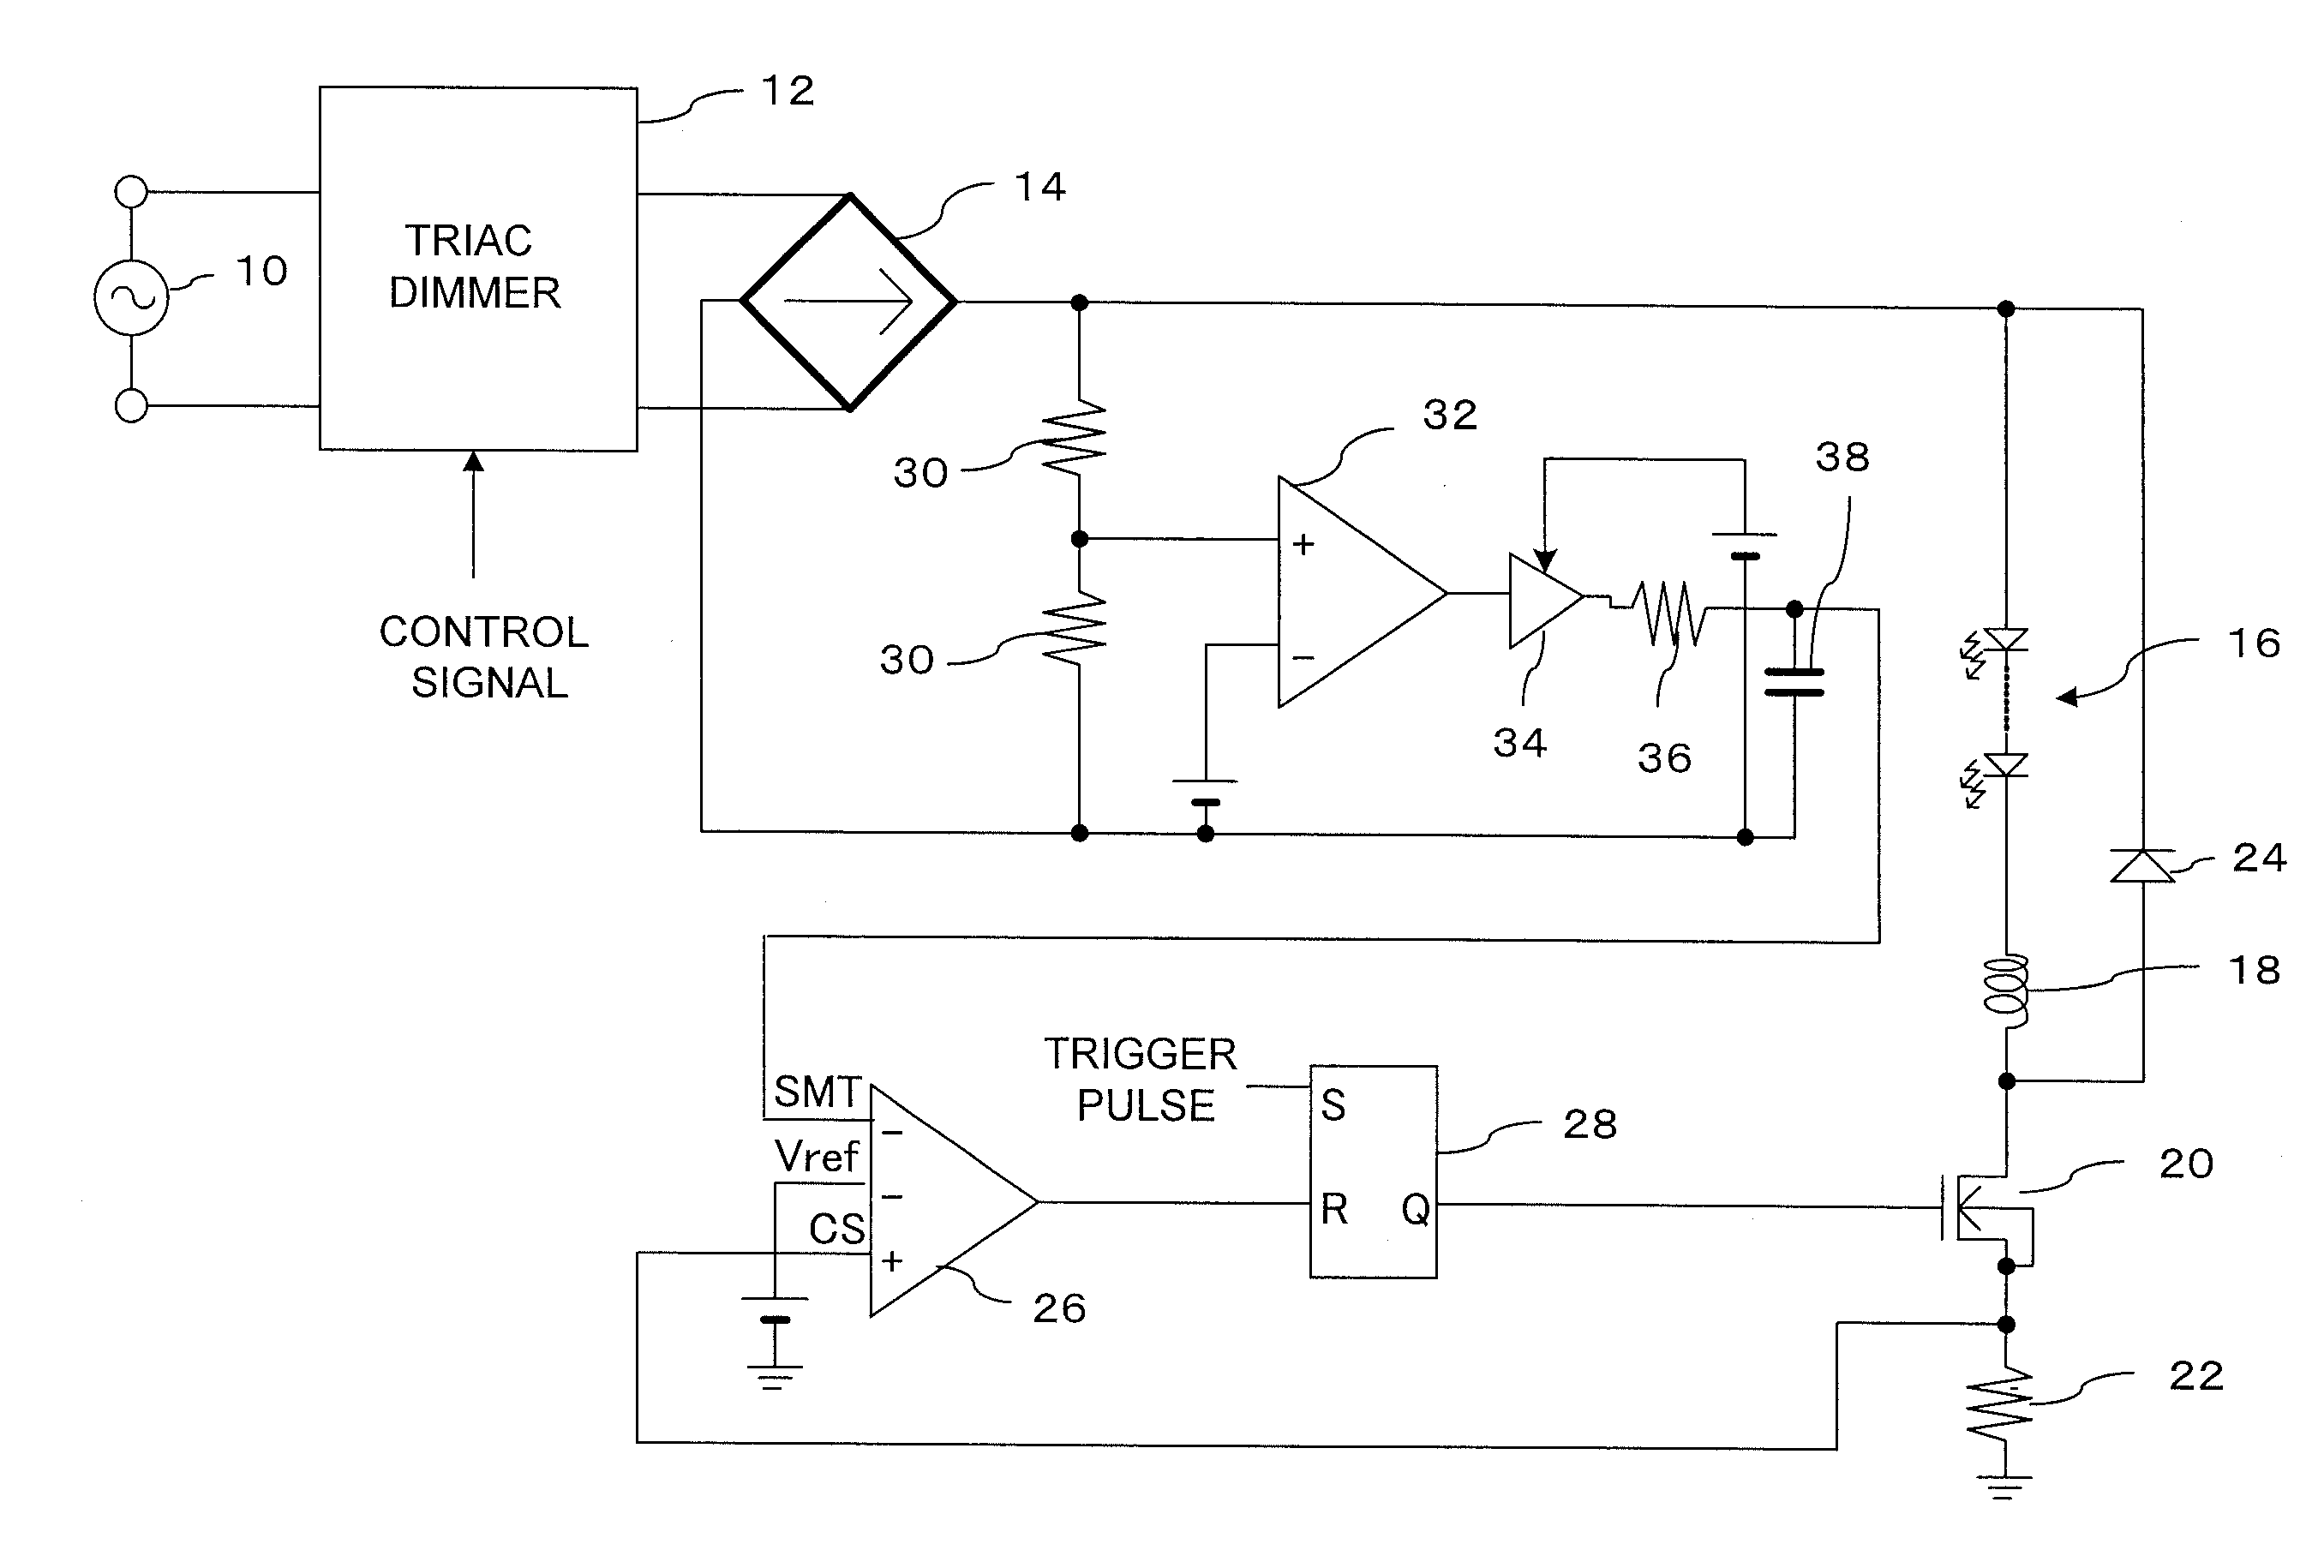 LED dimmer circuit